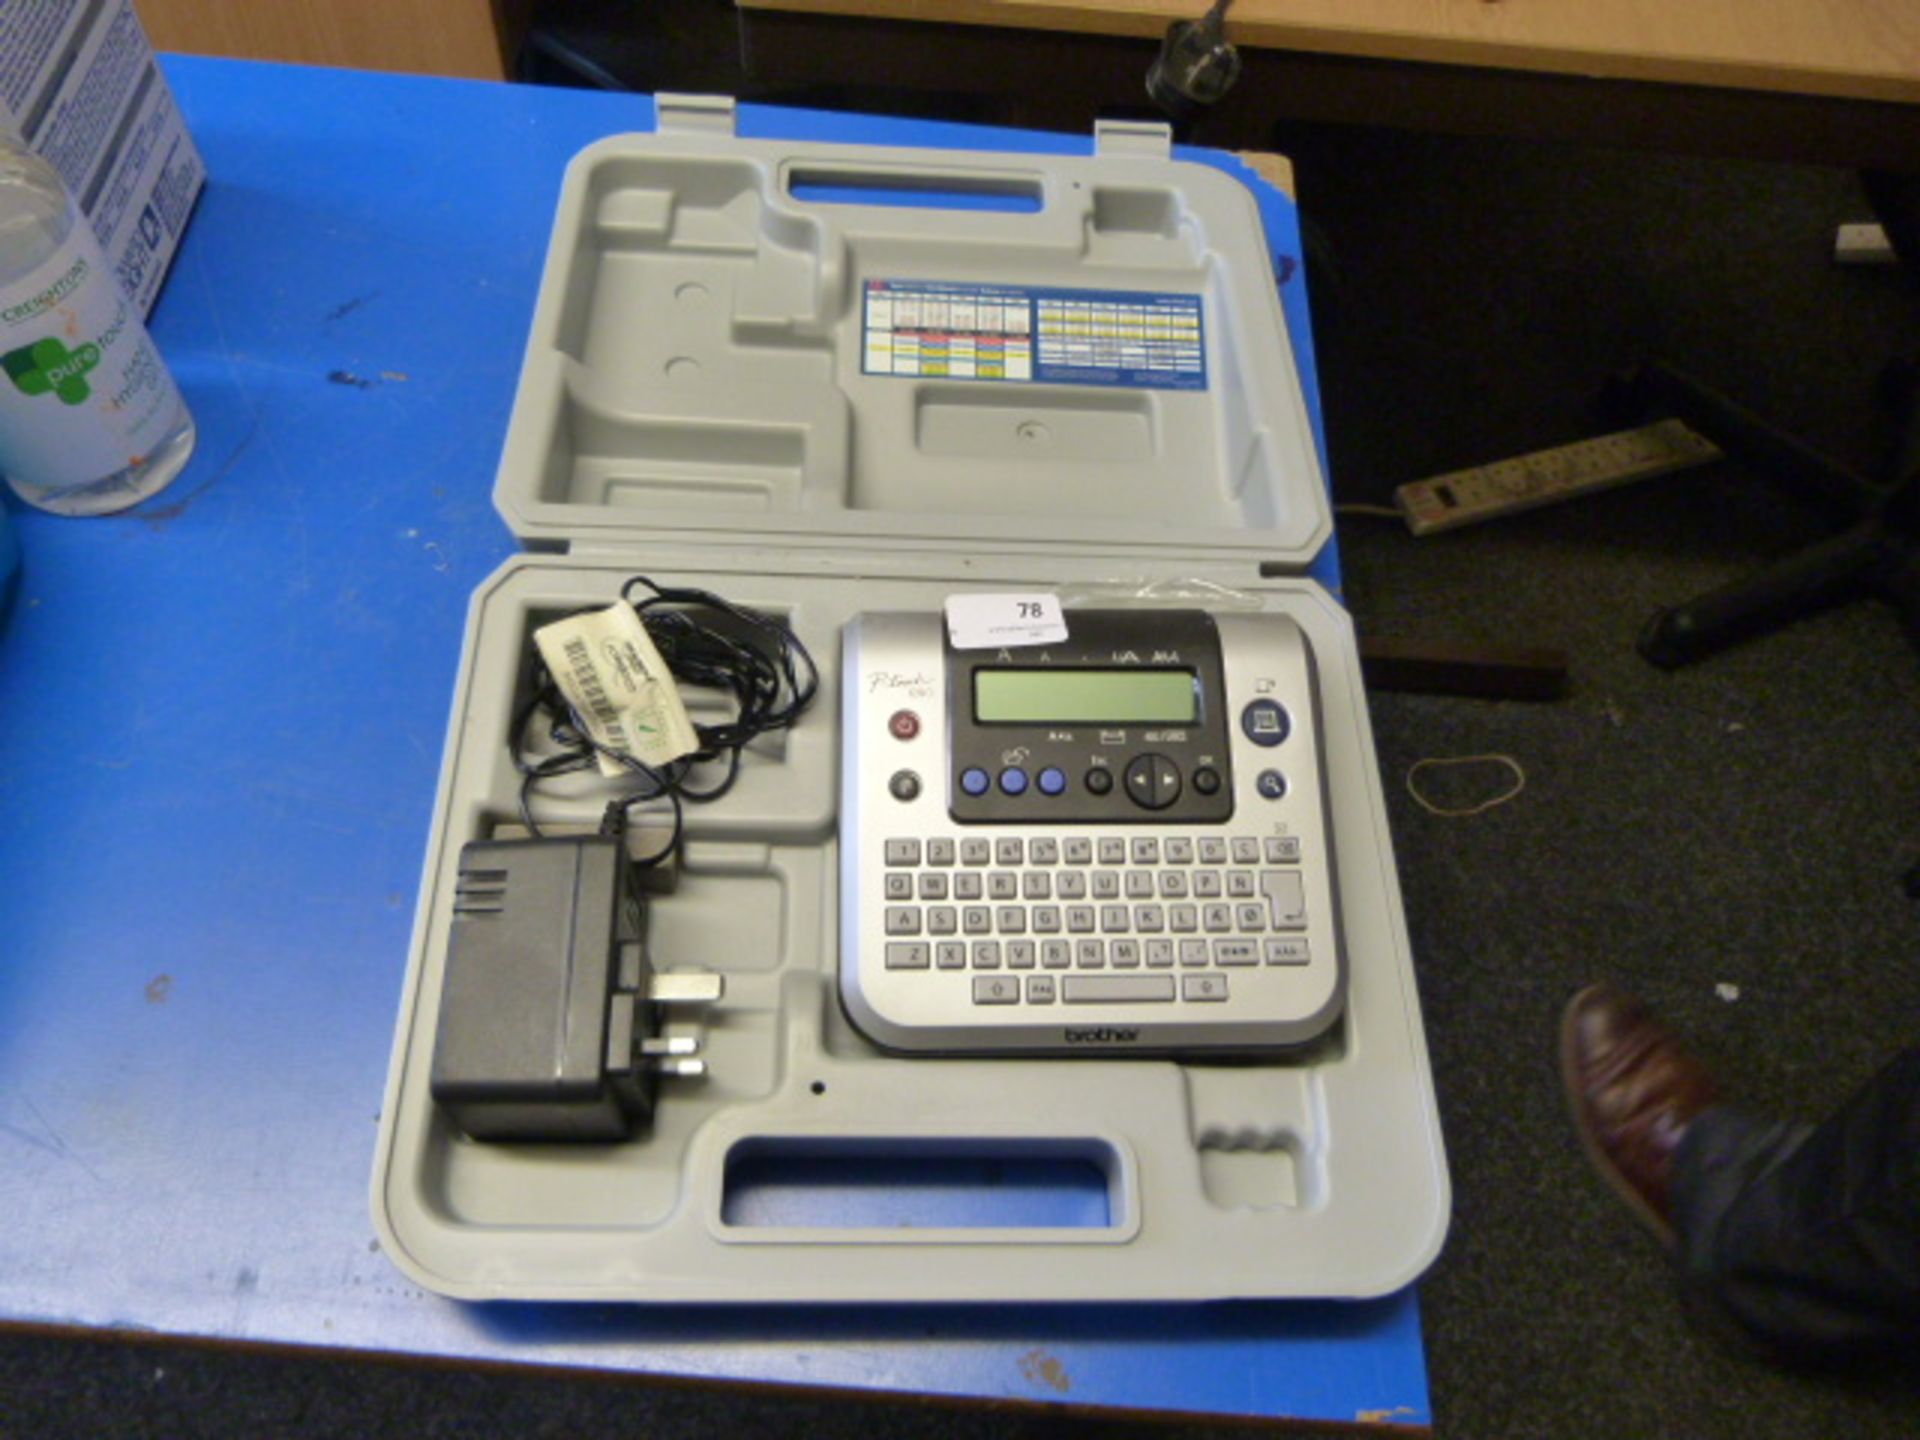 *Brother P-Touch 1280 Label Printer